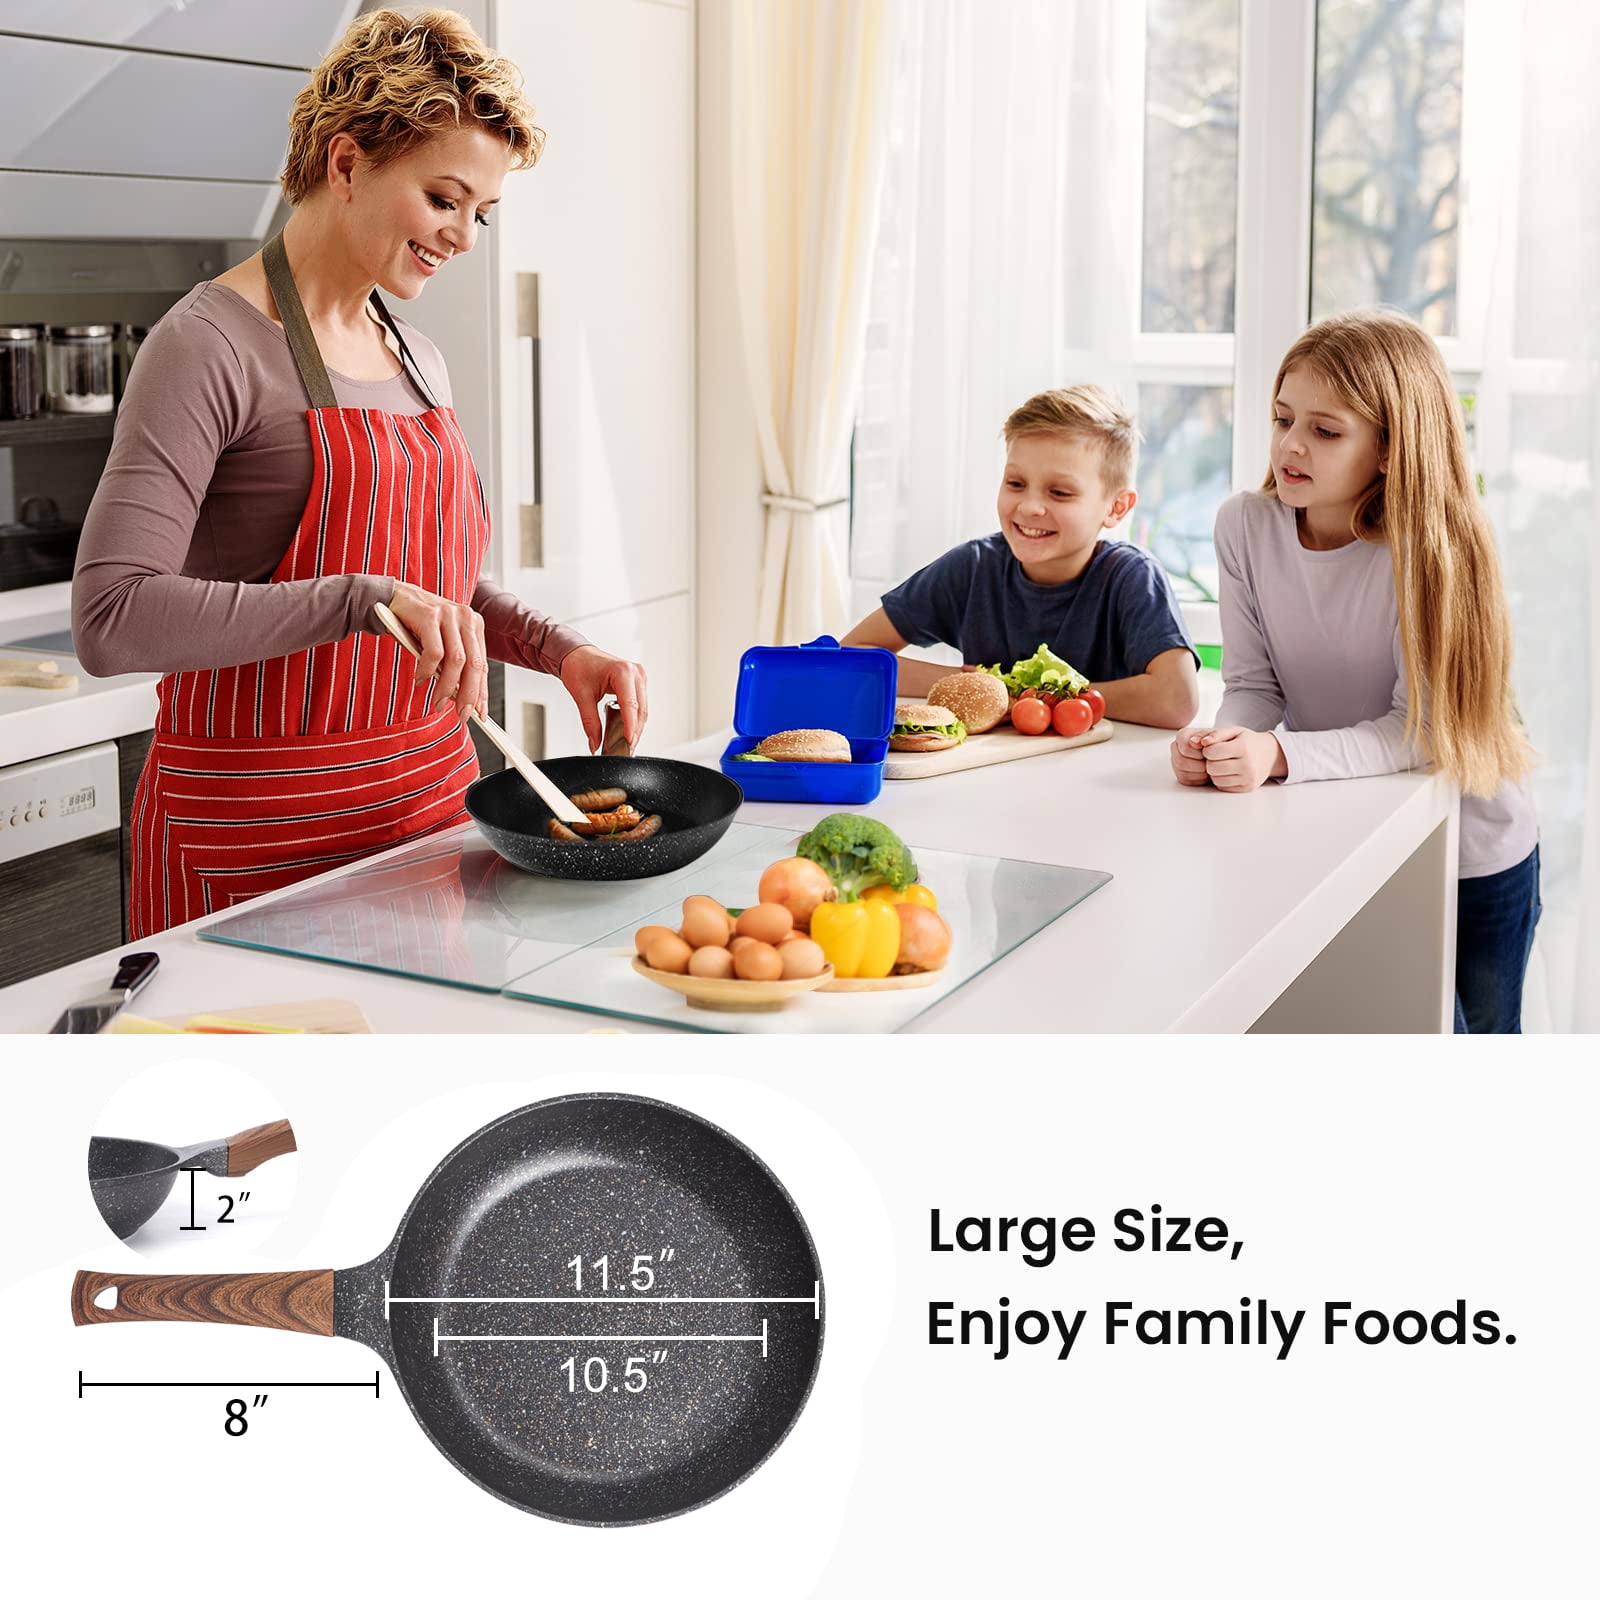  DIIG Nonstick Frying Pan with Lid, 12 in No Stick PFOA-Free  Granite Stone Coating Chef's Pan, Large 30 cm Cooking Pans for Family, Gift Cookware  Pan Set for Gas Stove, Induction